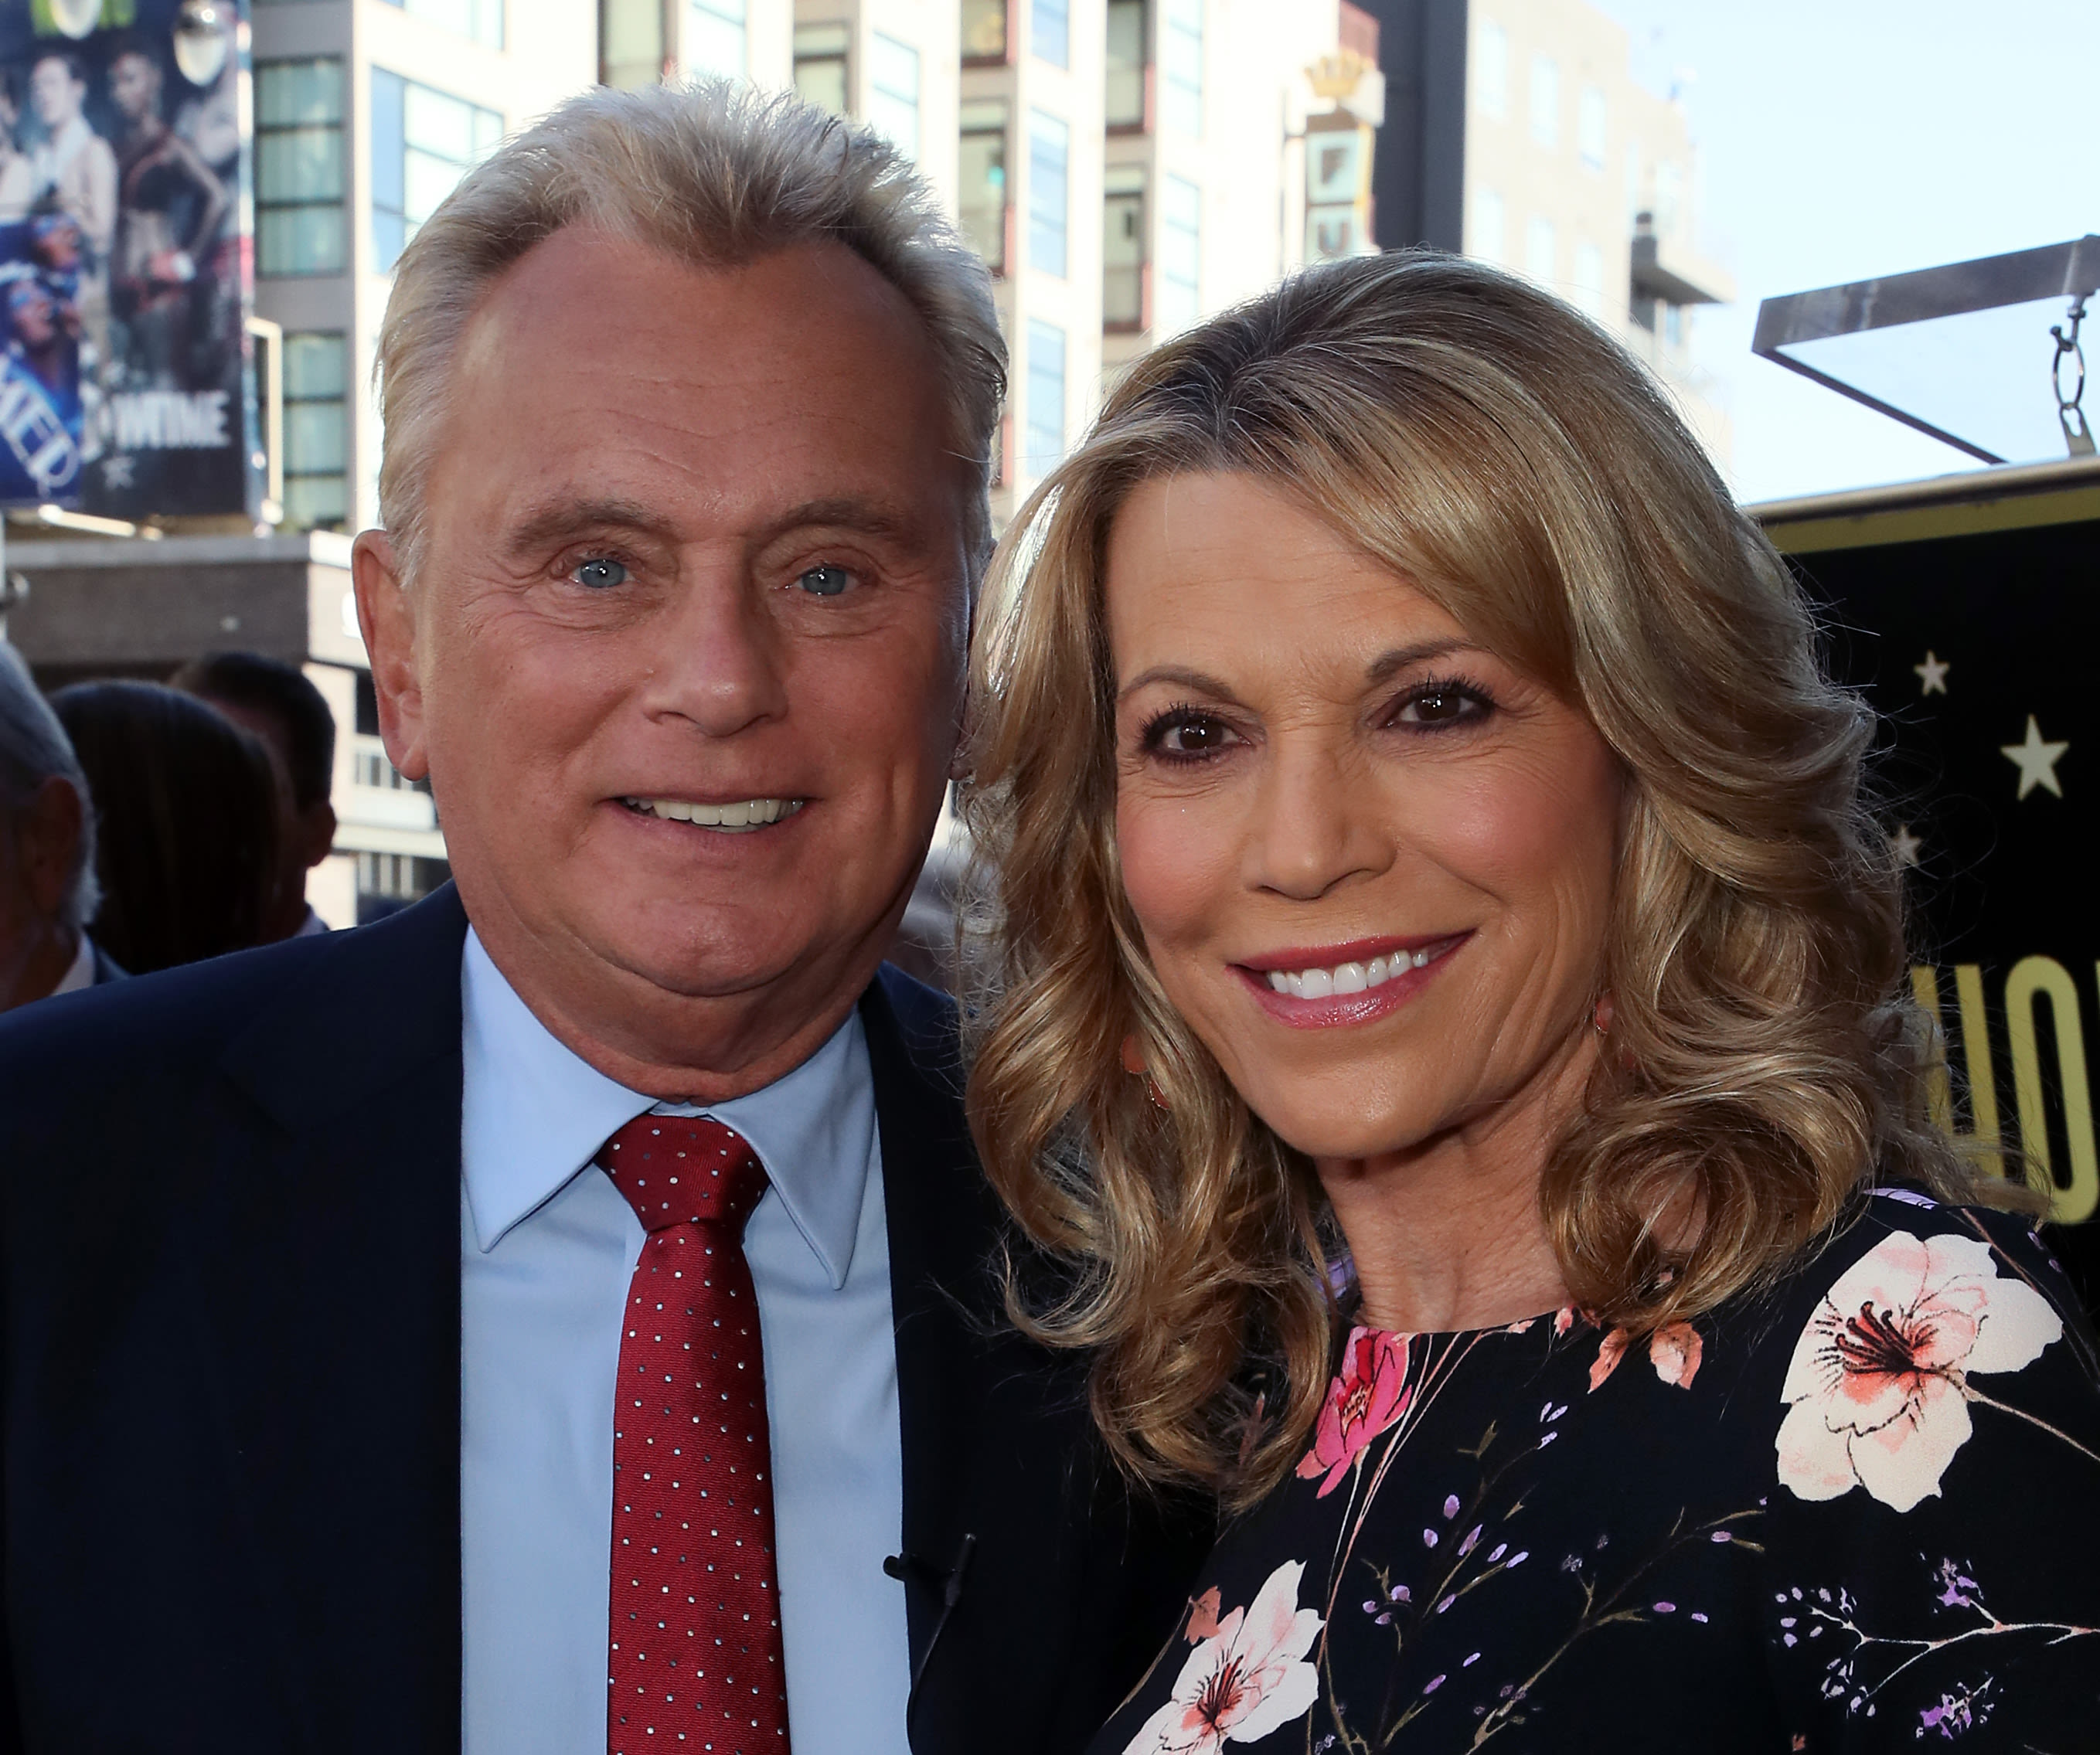 Fans buzz as Vanna White and Ryan Seacrest team up on 'Wheel of Fortune'